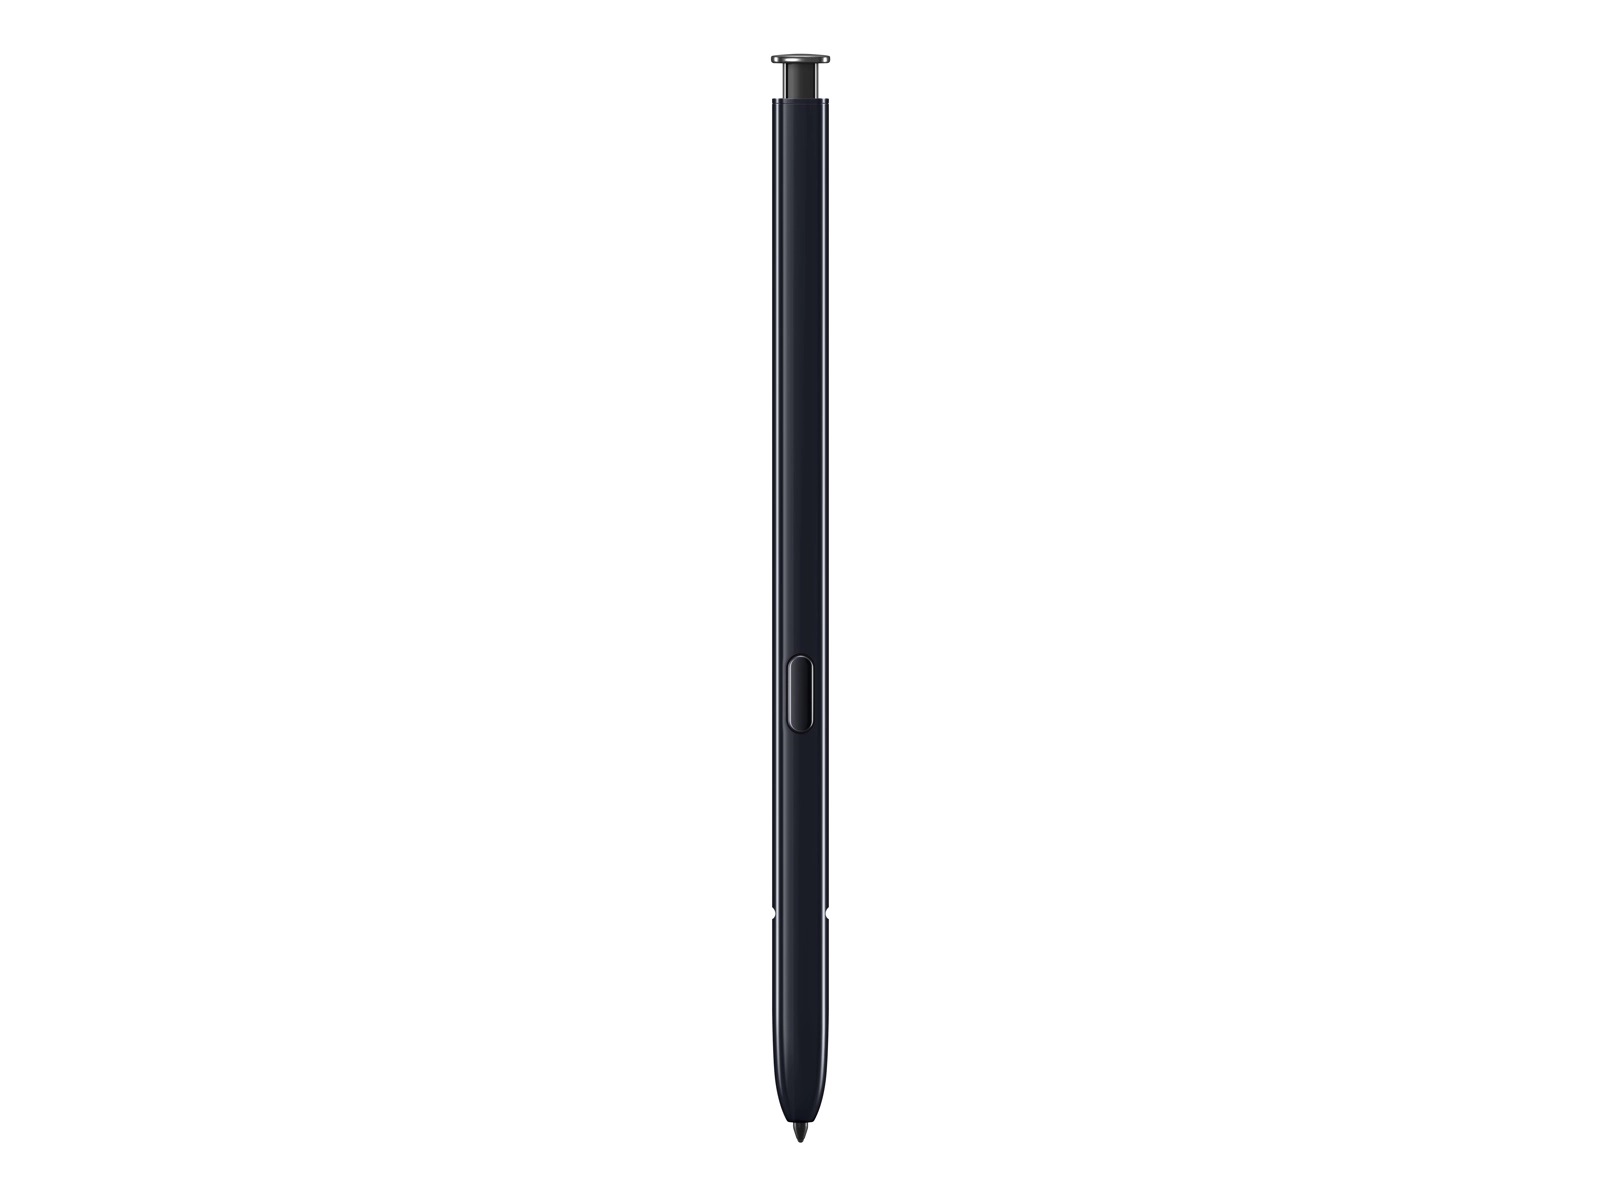 now buy the Galaxy Note 10 S Pen 